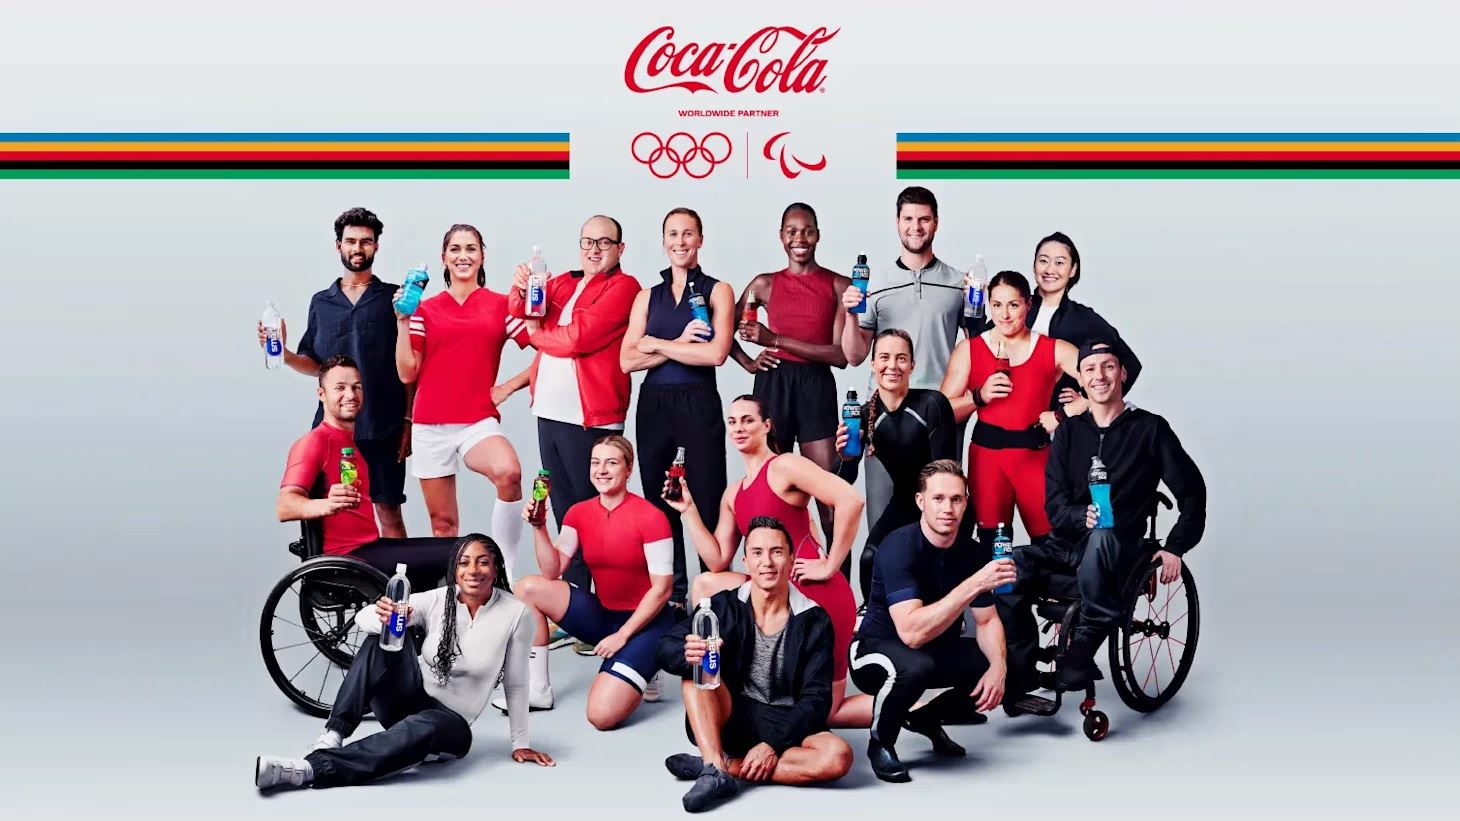 Coca Cola to Celebrate Everyday Greatness for Paris 2024 as it announces global athlete team for Olympic and Paralympic Games